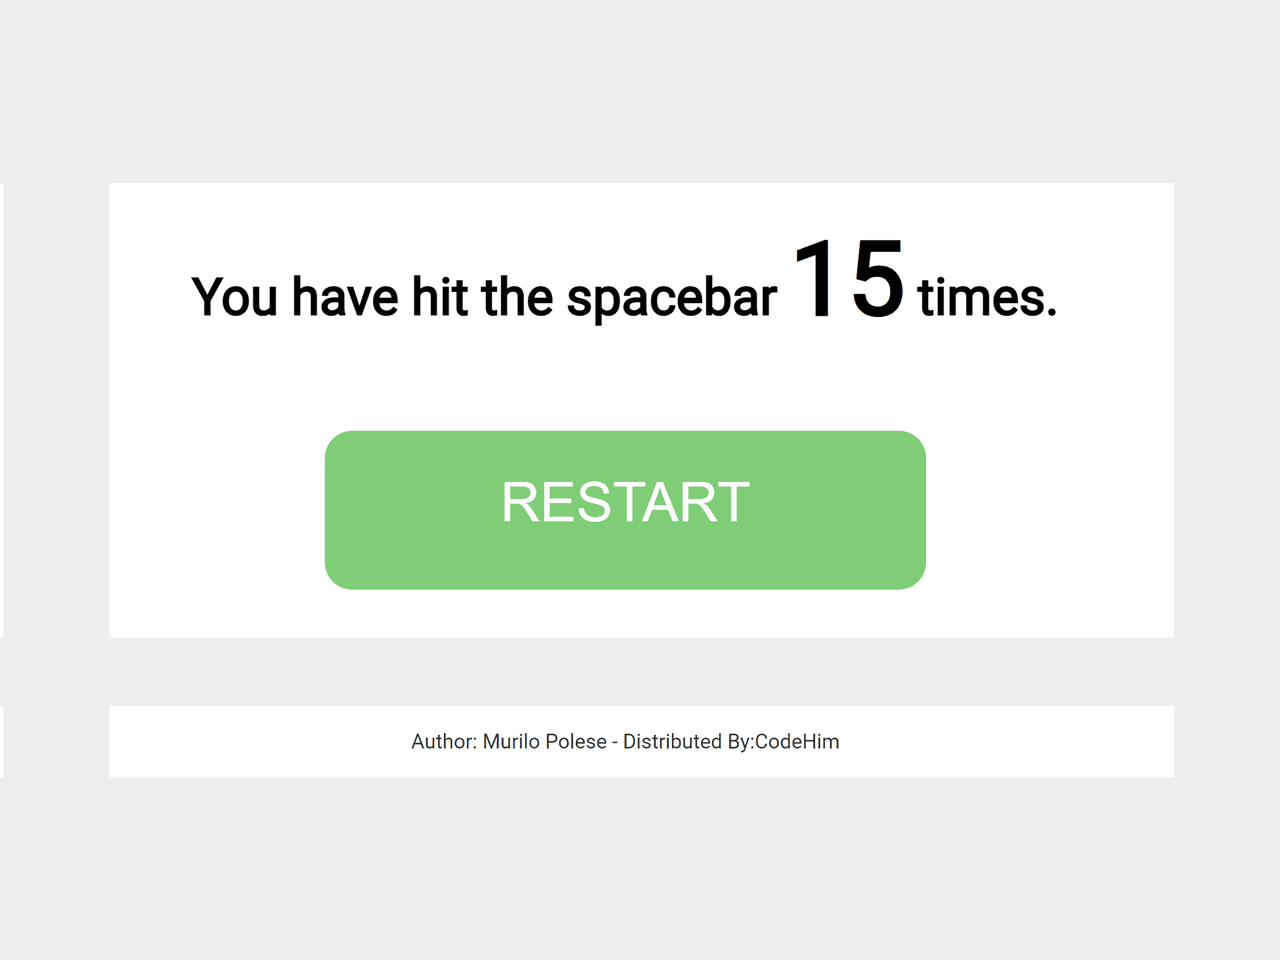 Spacebar Counter  Test Your Clicker Speed